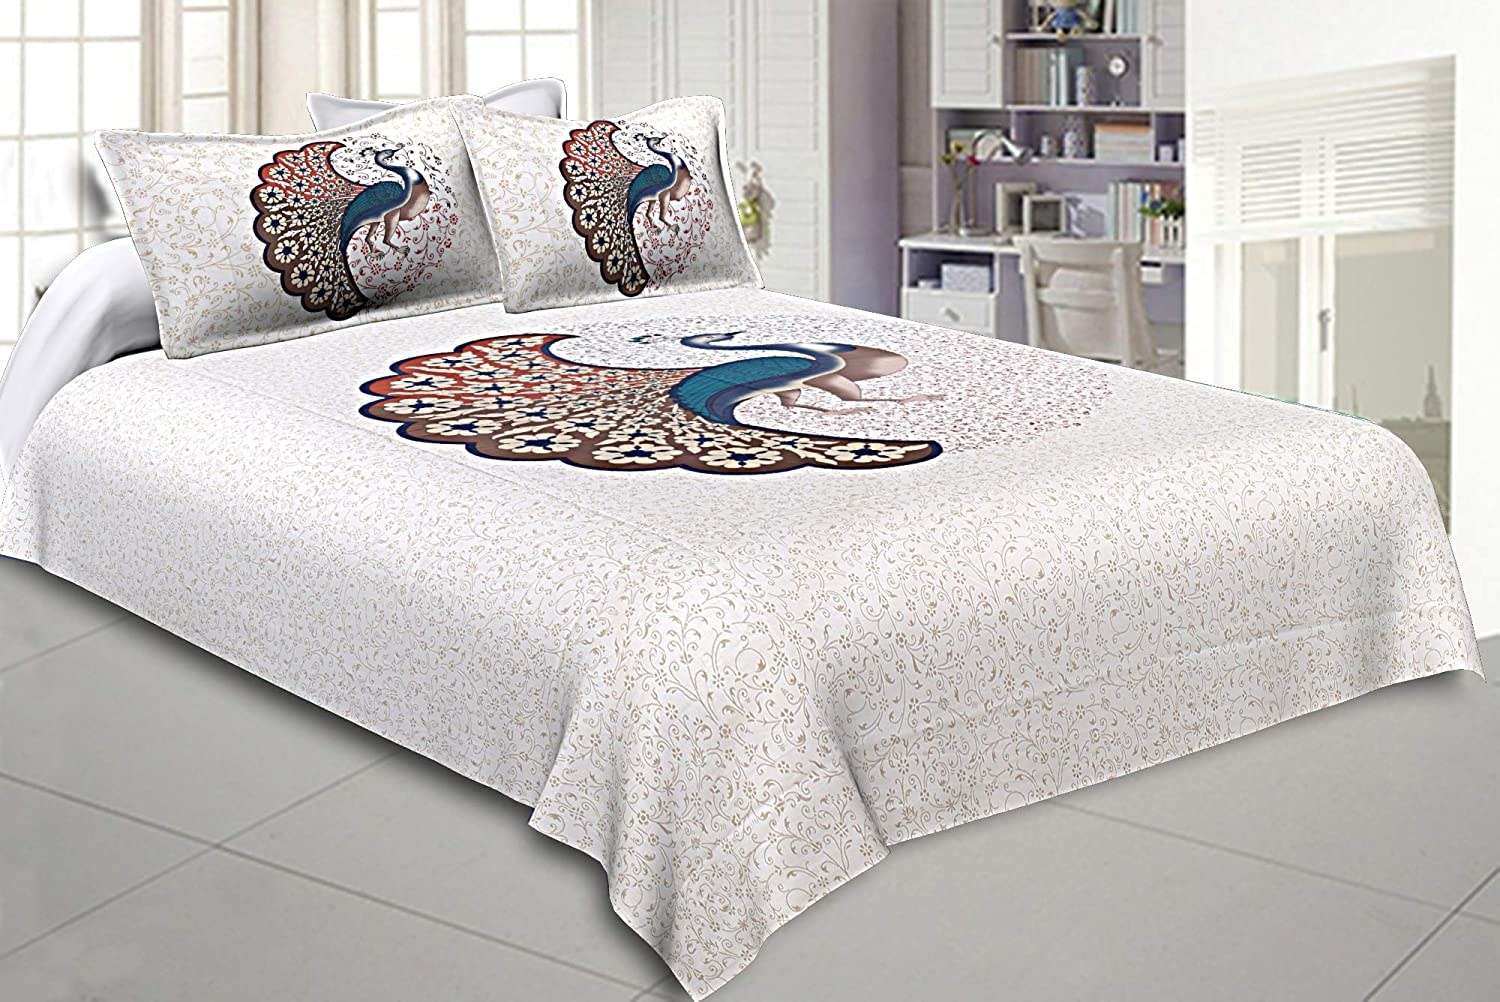 A peacock bedsheet on a bed